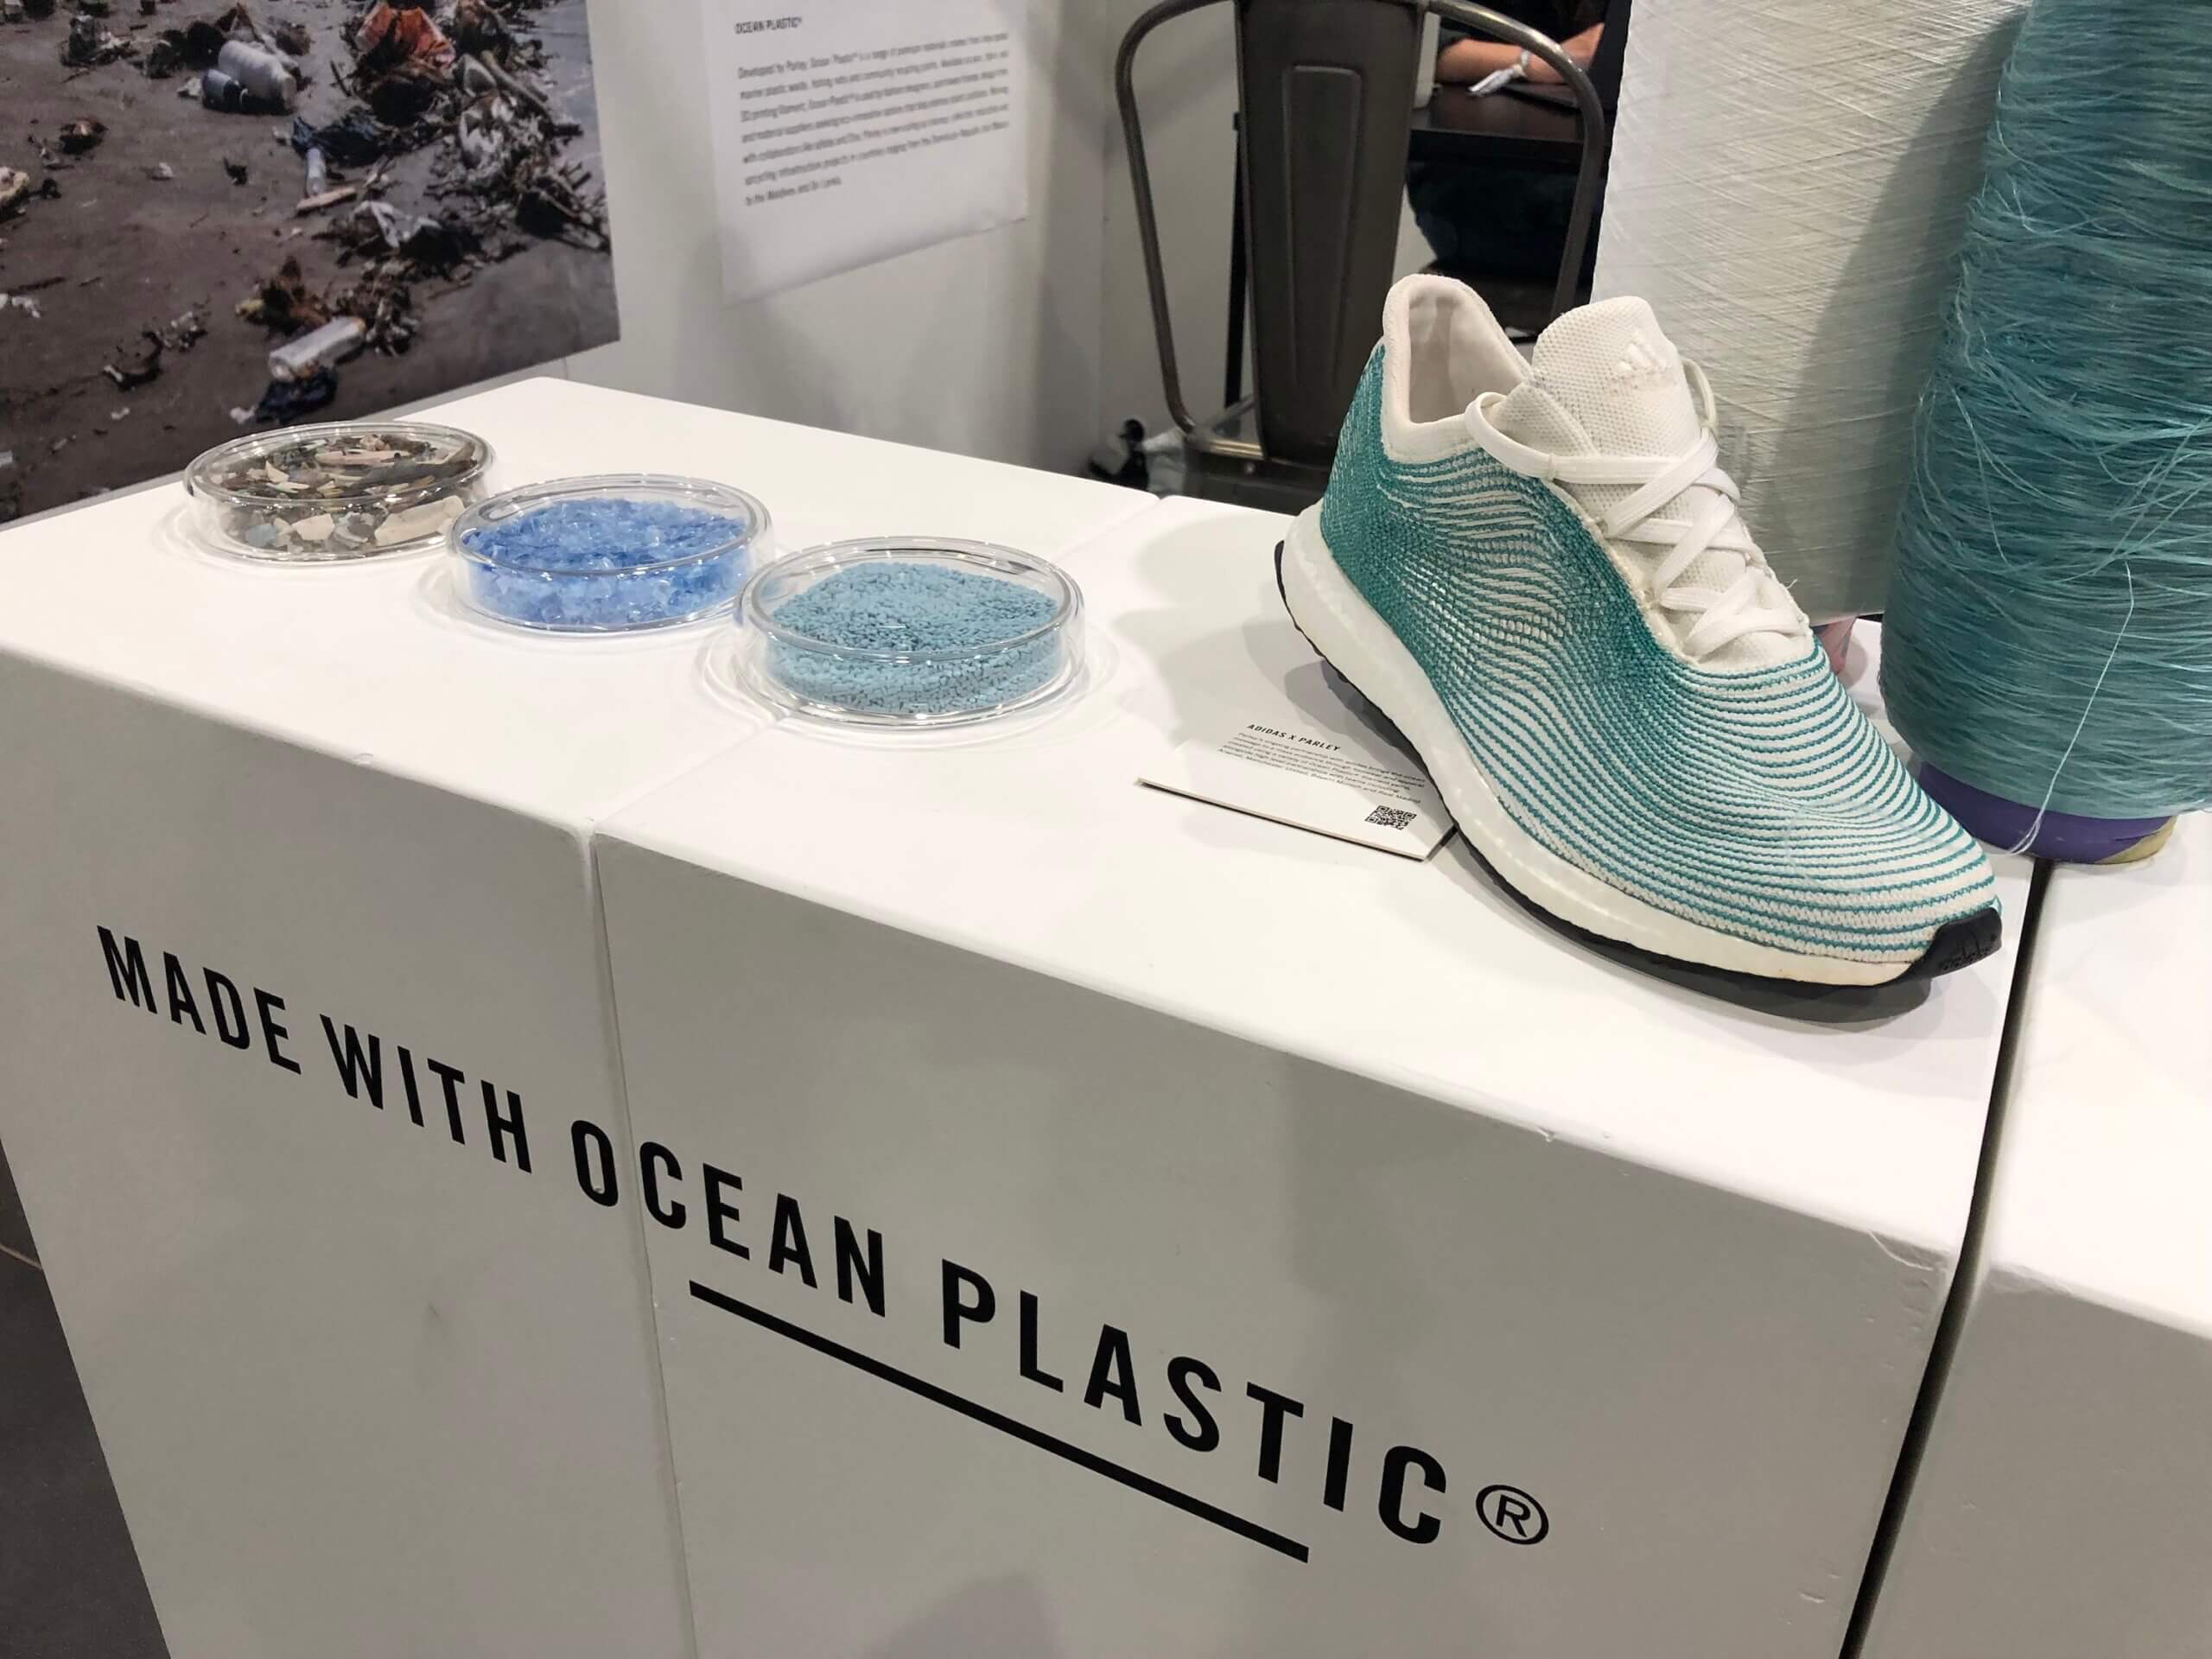 Store display with a blue green trainer and some micro plastics in dishes. The sign on the display says "Made with ocean plastics"